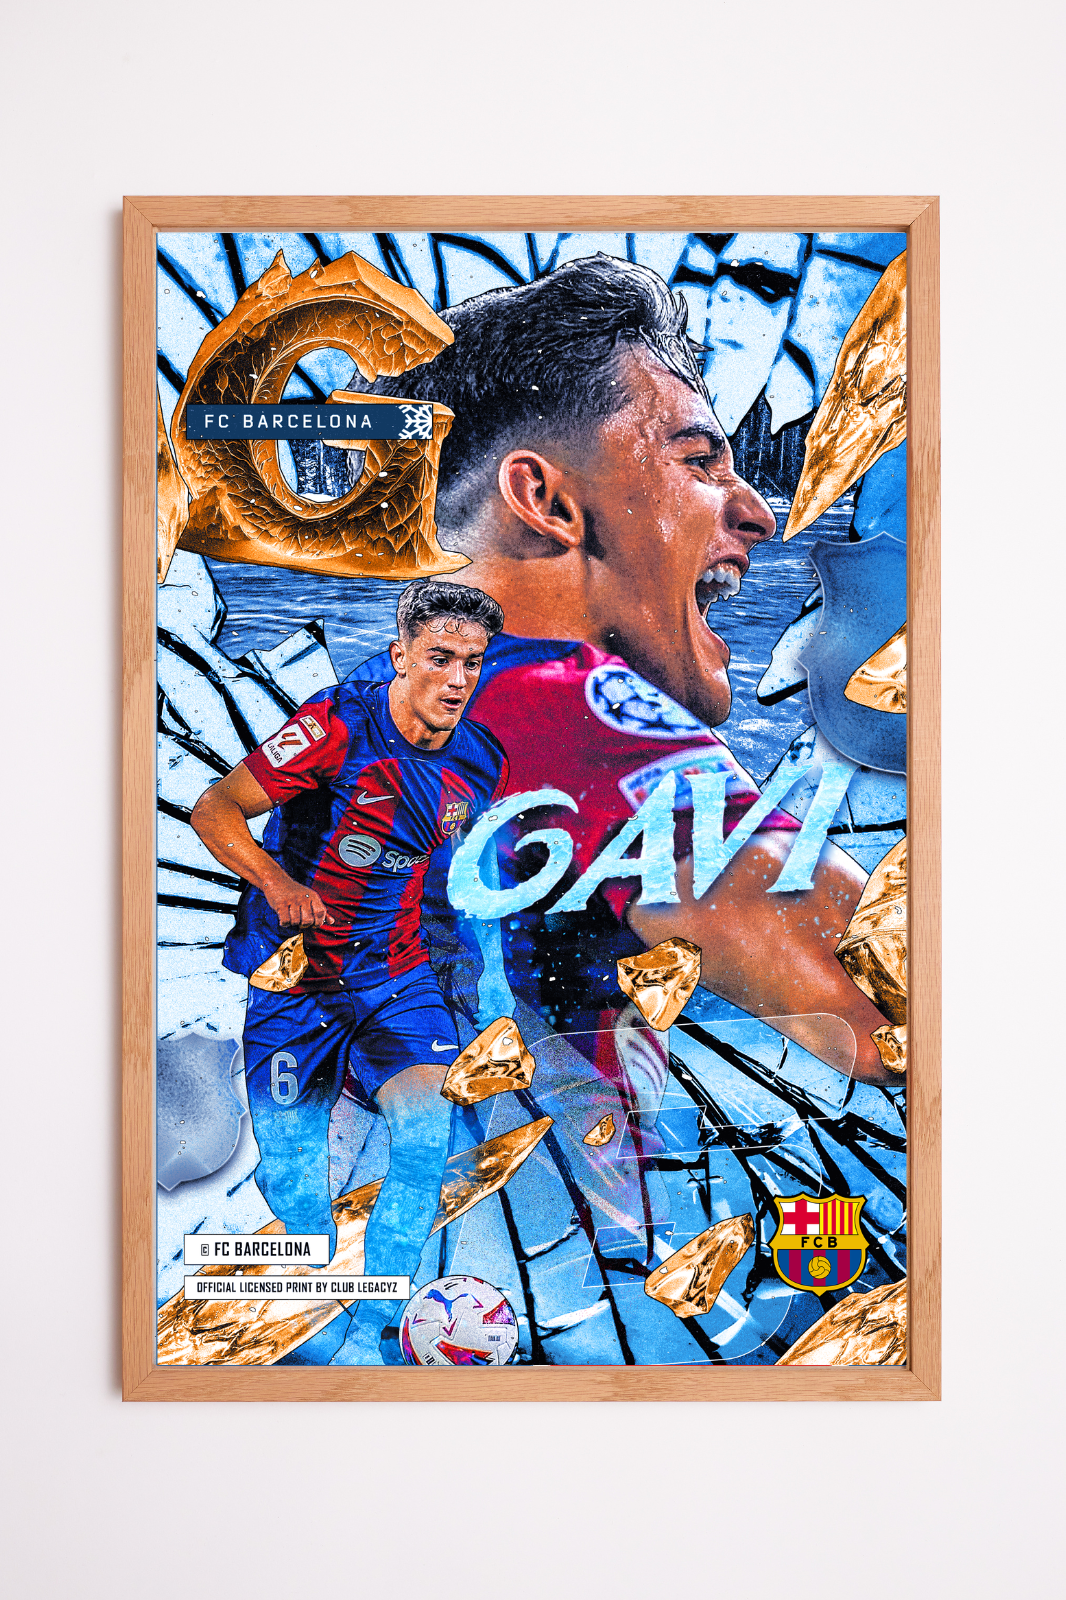 FC Barcelona - Gavi Frozen Poster limited to 100